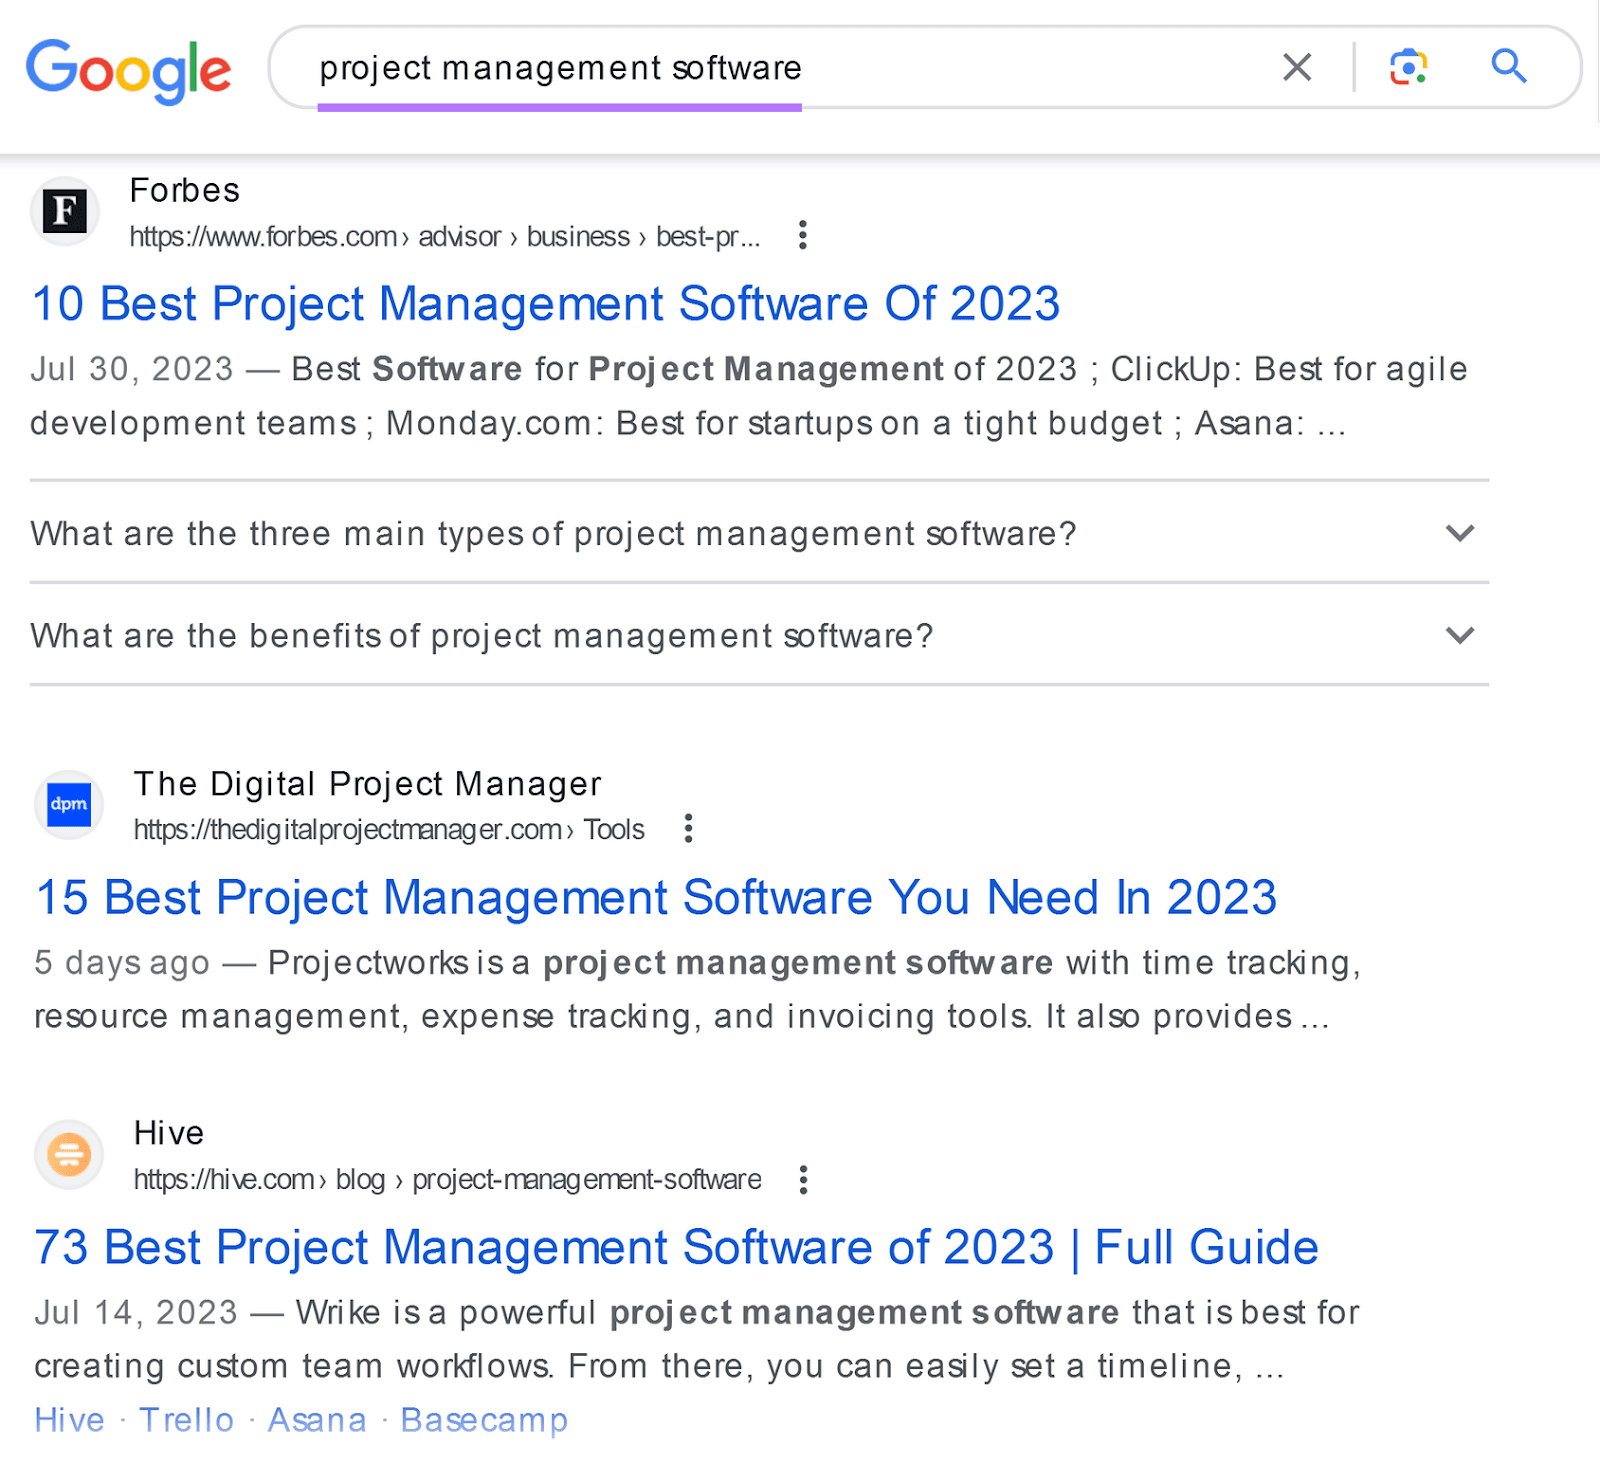 Google SERP for “project management software”